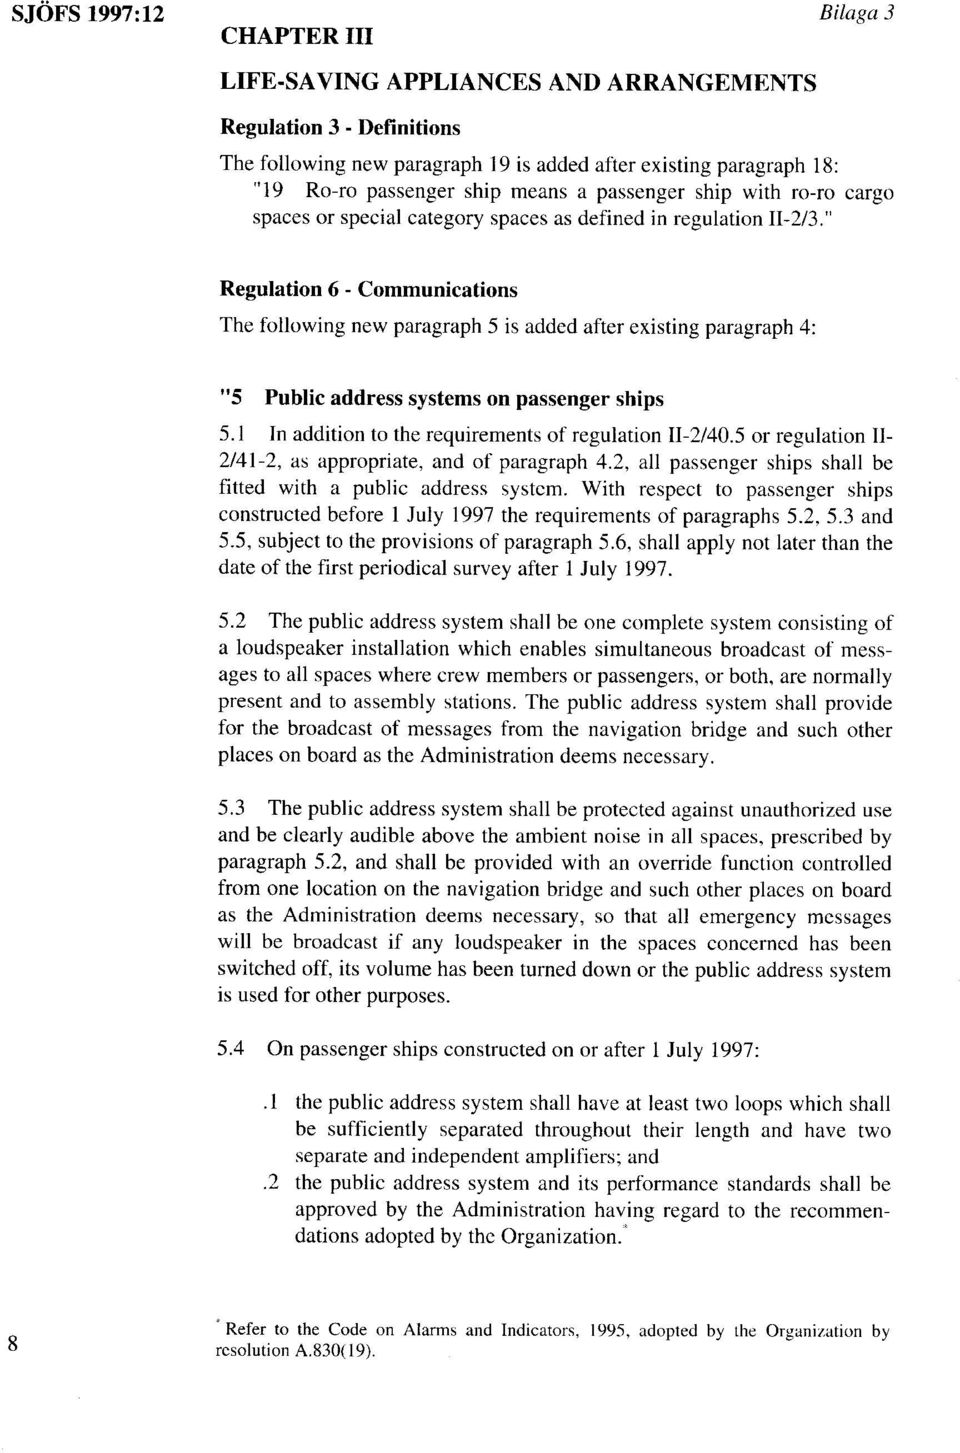 Regulation 6 - Communications The following new paragraph 5 is added after existing paragraph 4: 5 Publit address systems on passenger ships 5.1 In addition to the requirements of regulation II-2/40.